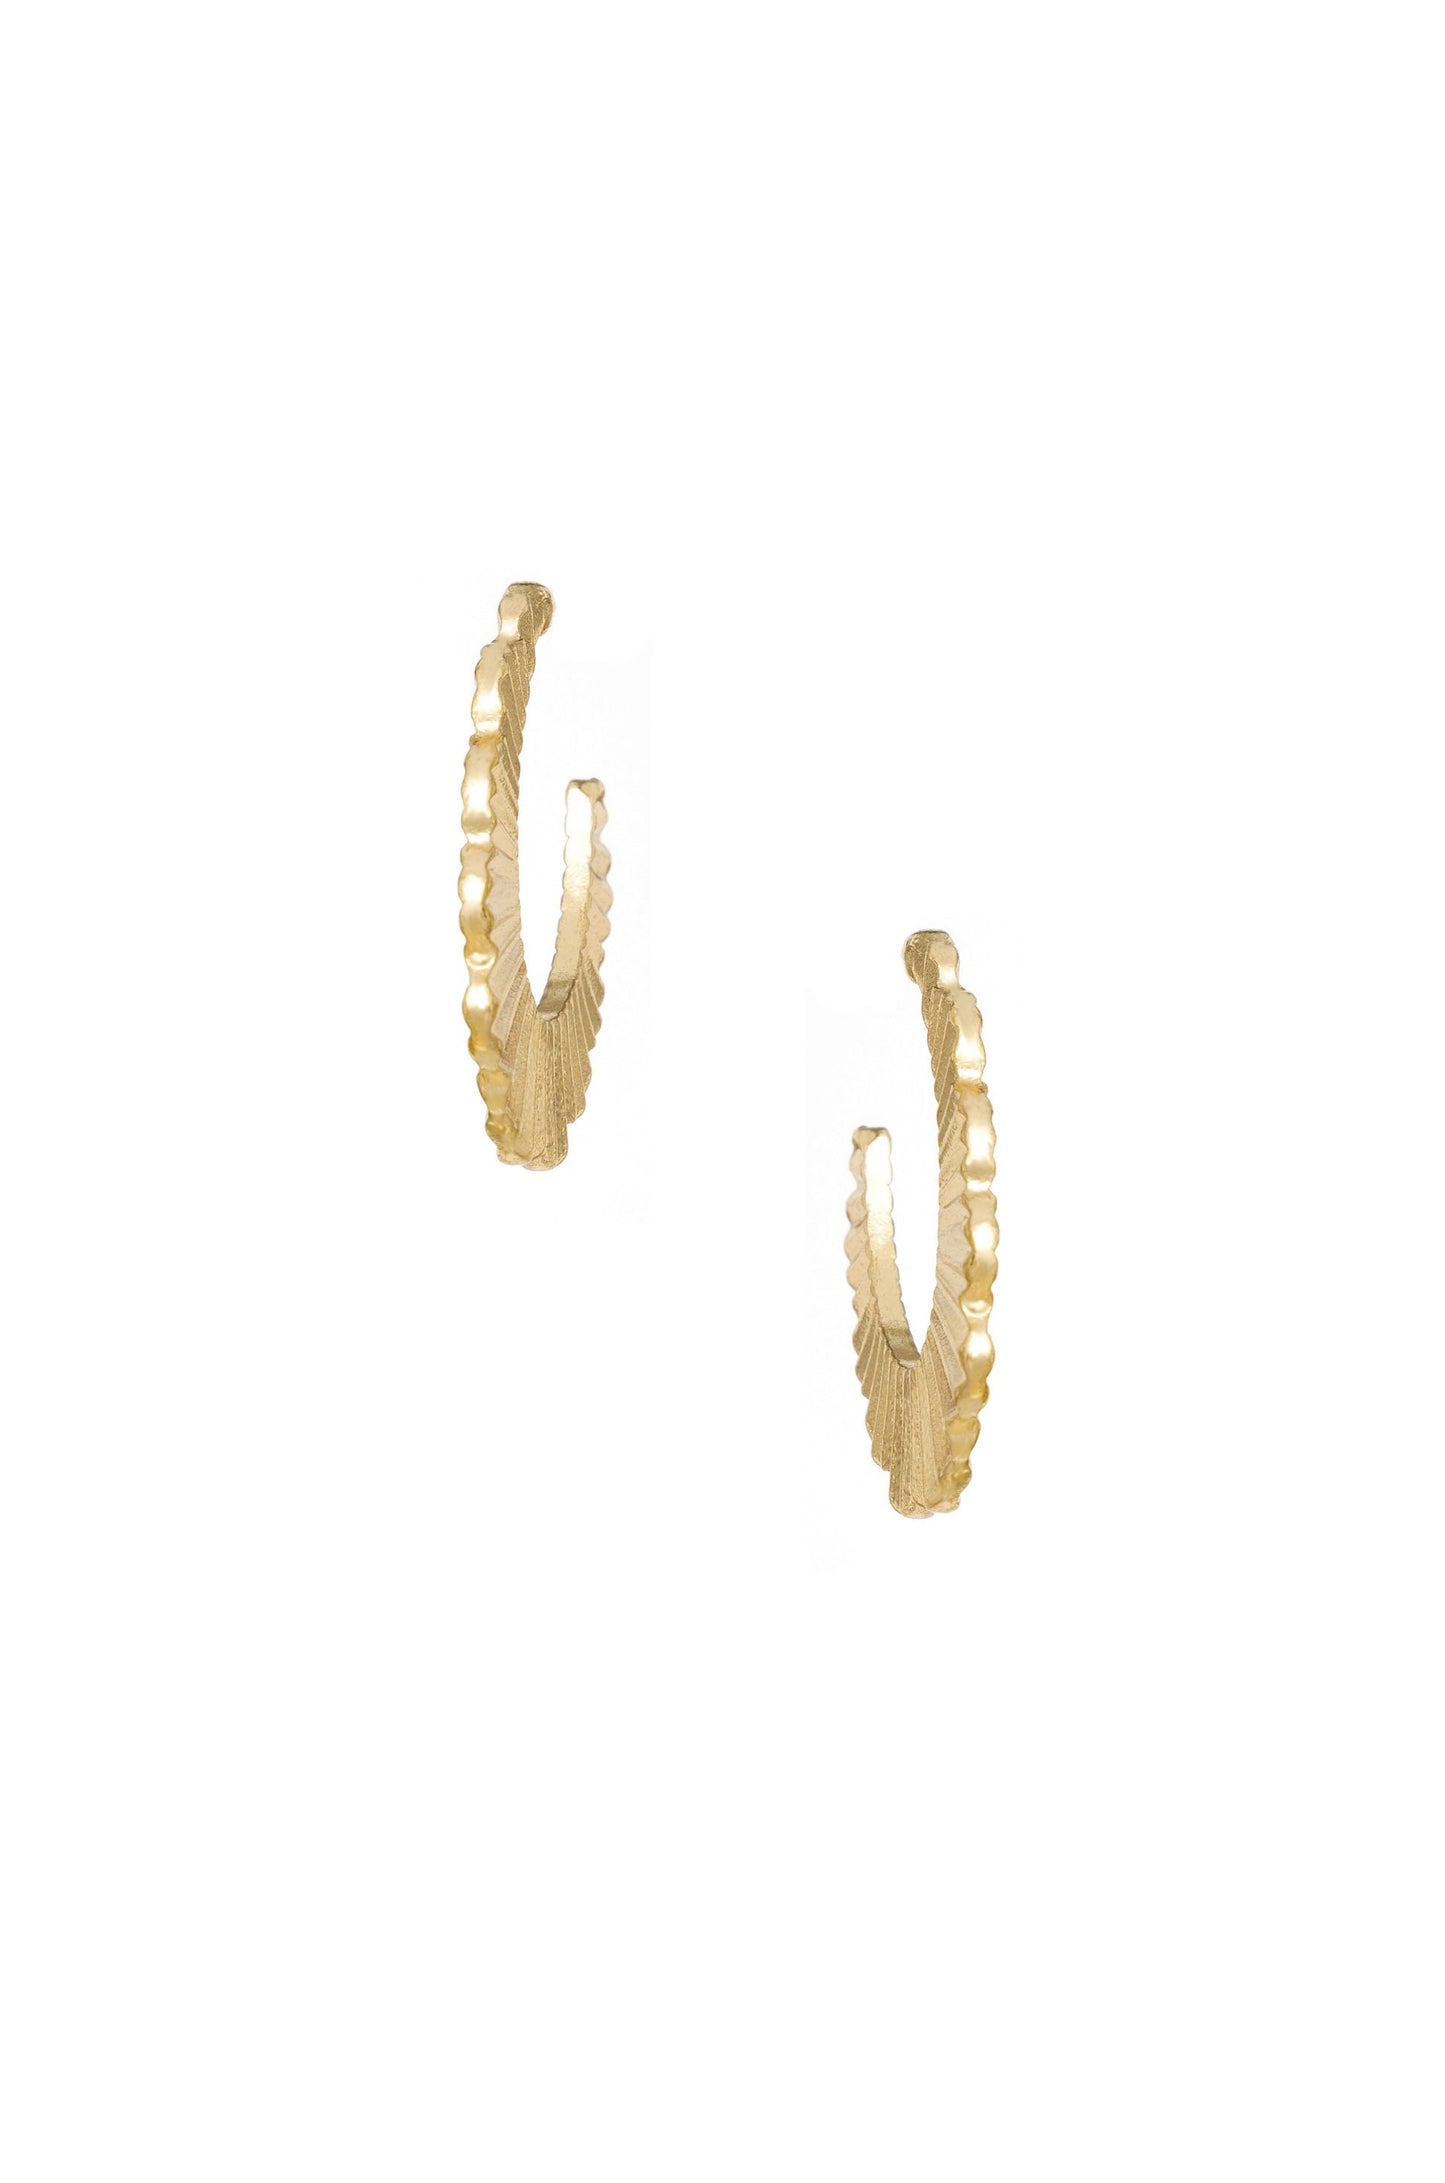 Textured Relics 18k Gold Plated Hoop Earrings on white background 2